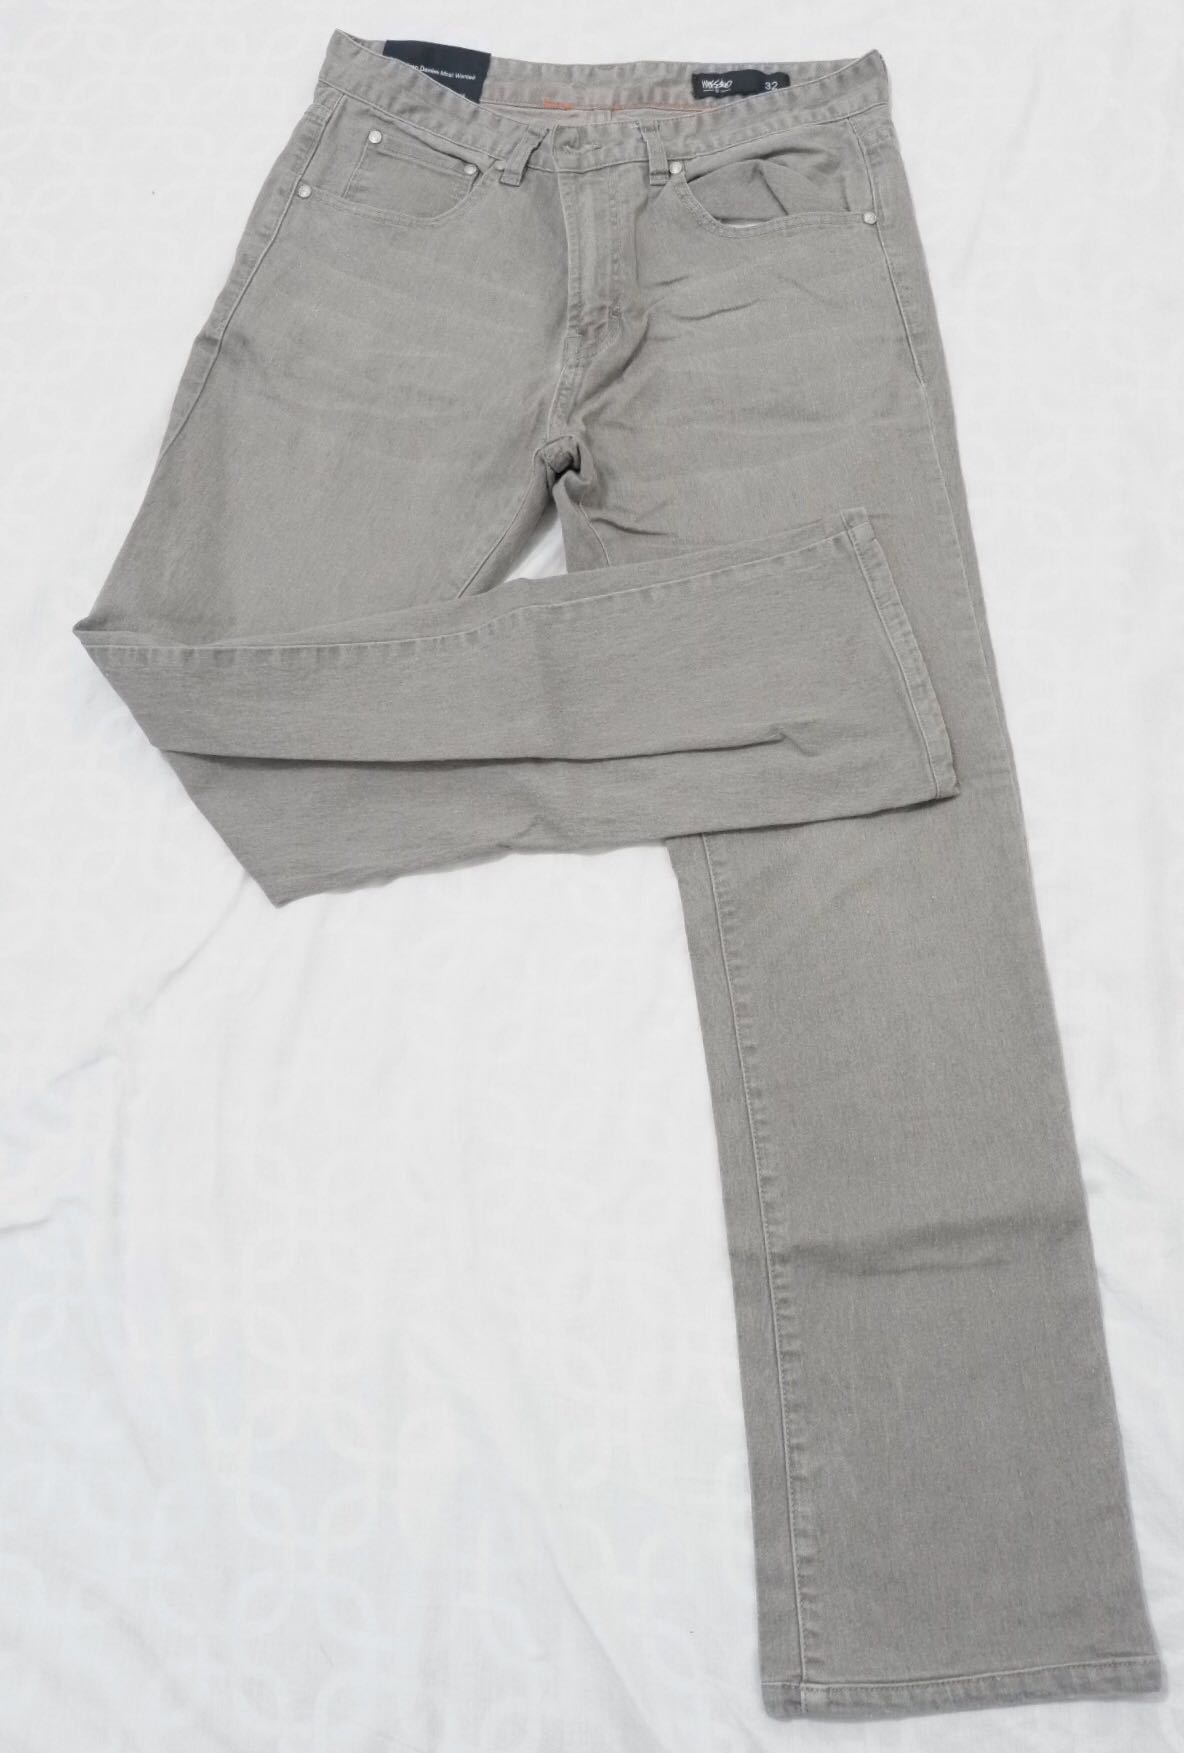 Mossimo Pants, Men's Fashion, Bottoms, Trousers on Carousell